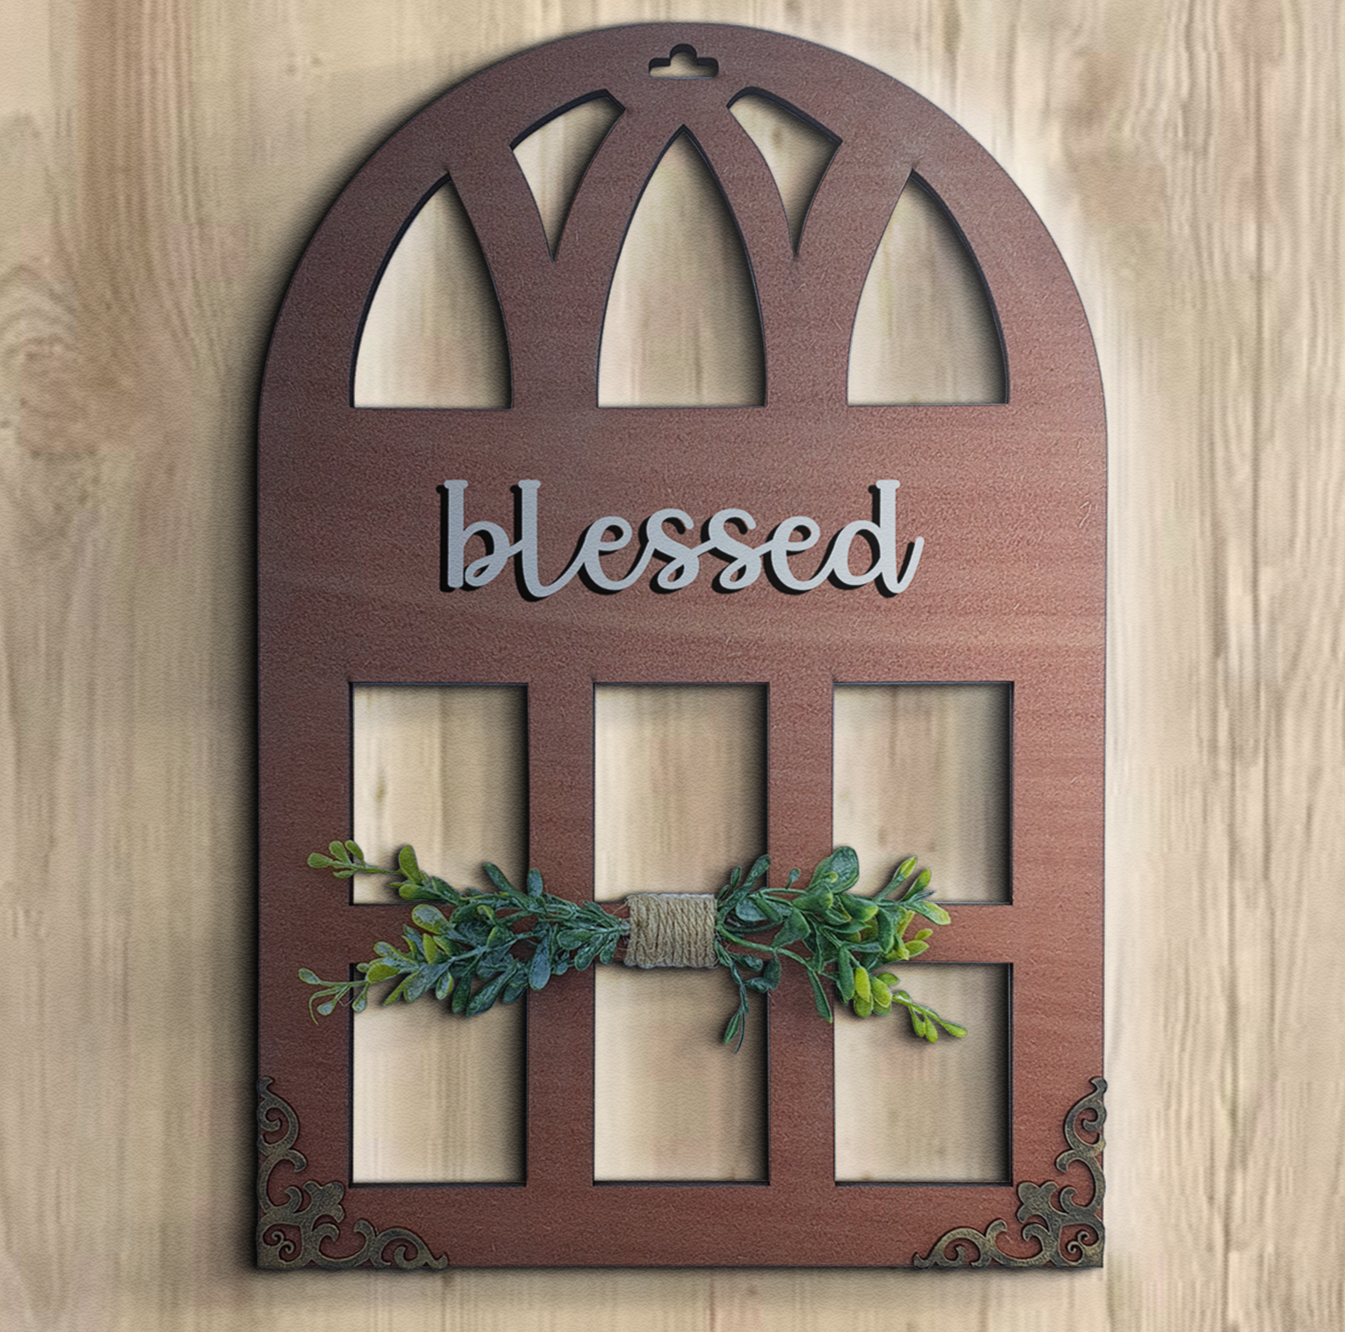 Blessed Window Wall Art